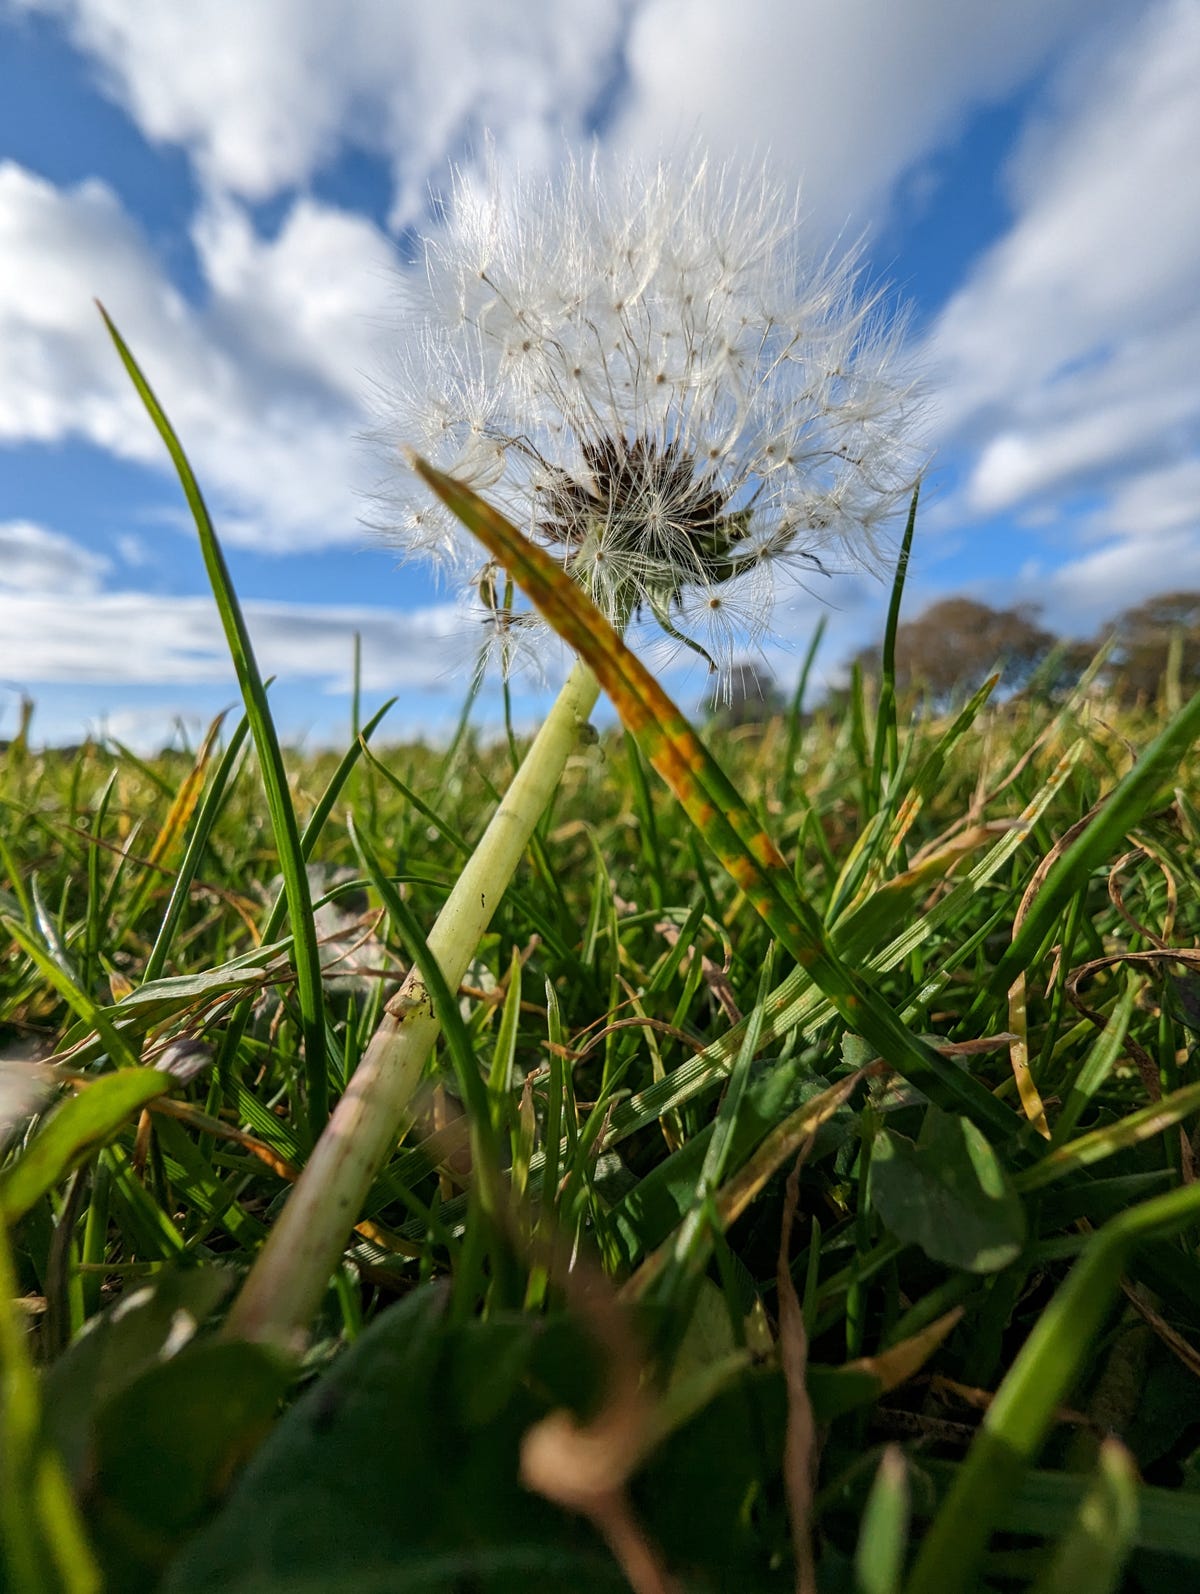 A close up image of a dandelion in grass with a cloudy blue sky behind.